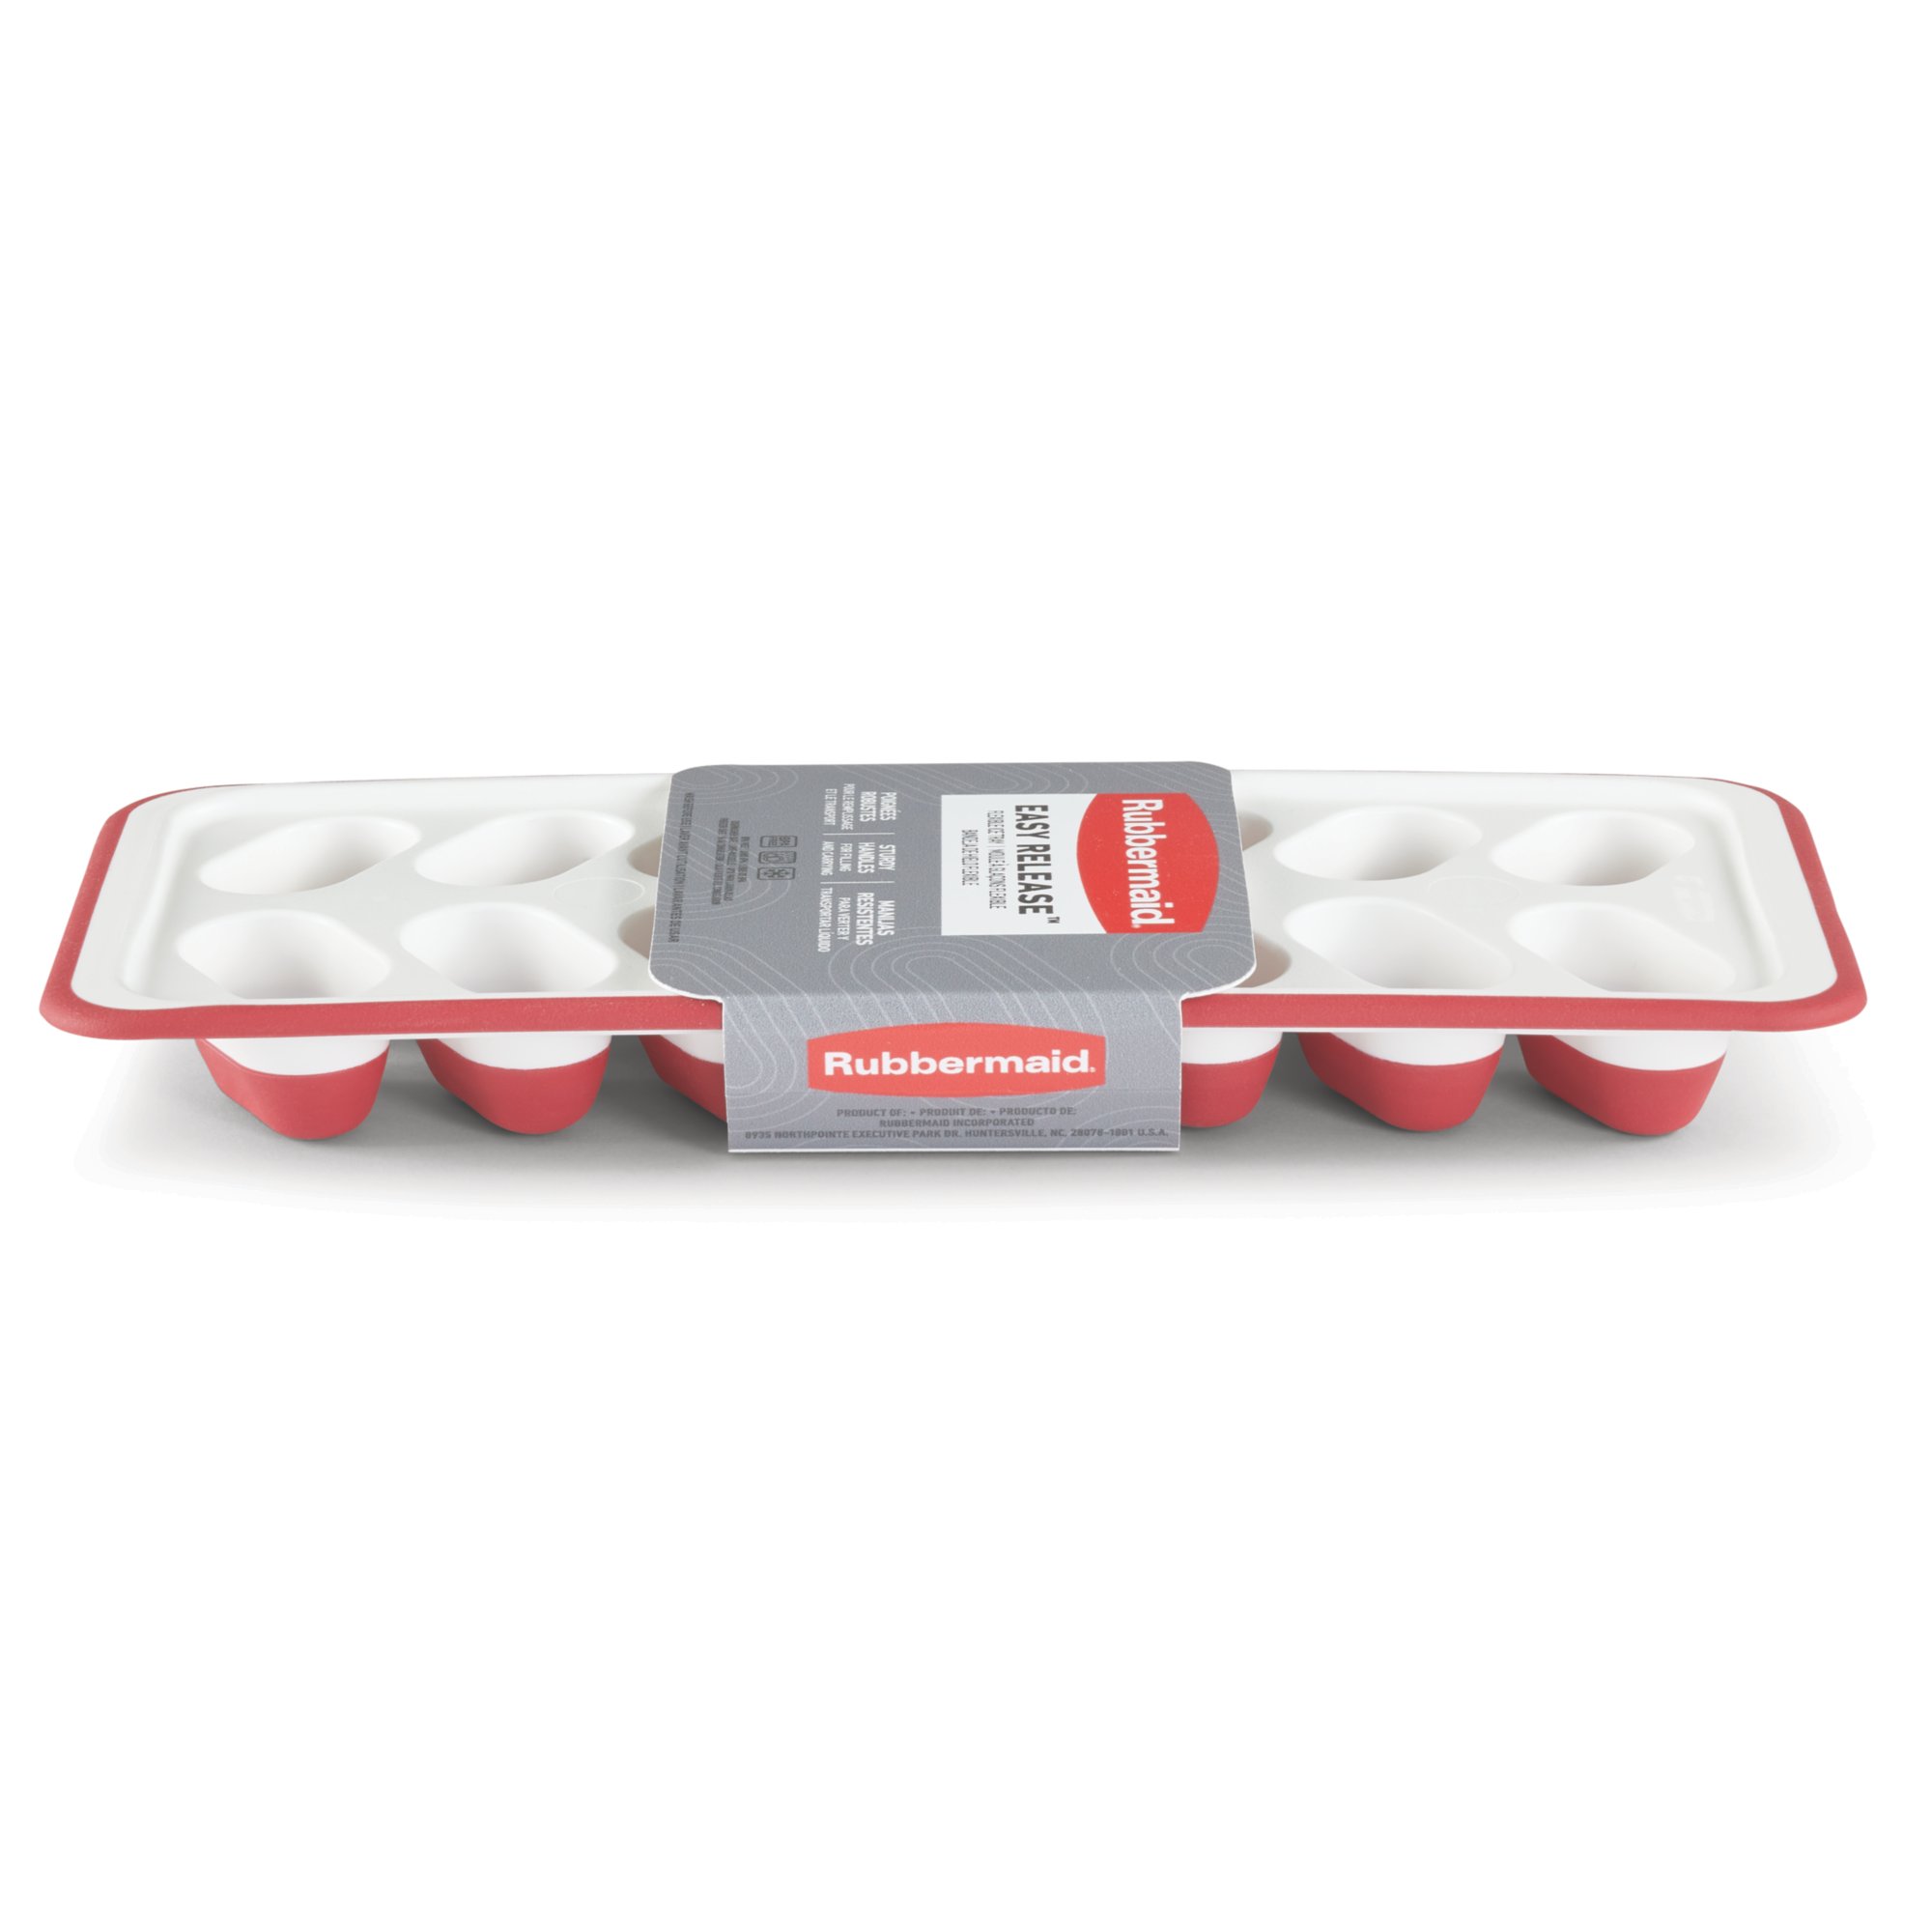 https://s7d9.scene7.com/is/image/NewellRubbermaid/2122588-rubbermaid-food-storage-eysr-flex-ice-tray-red-white-in-pack-straight-on-2?wid=2000&hei=2000